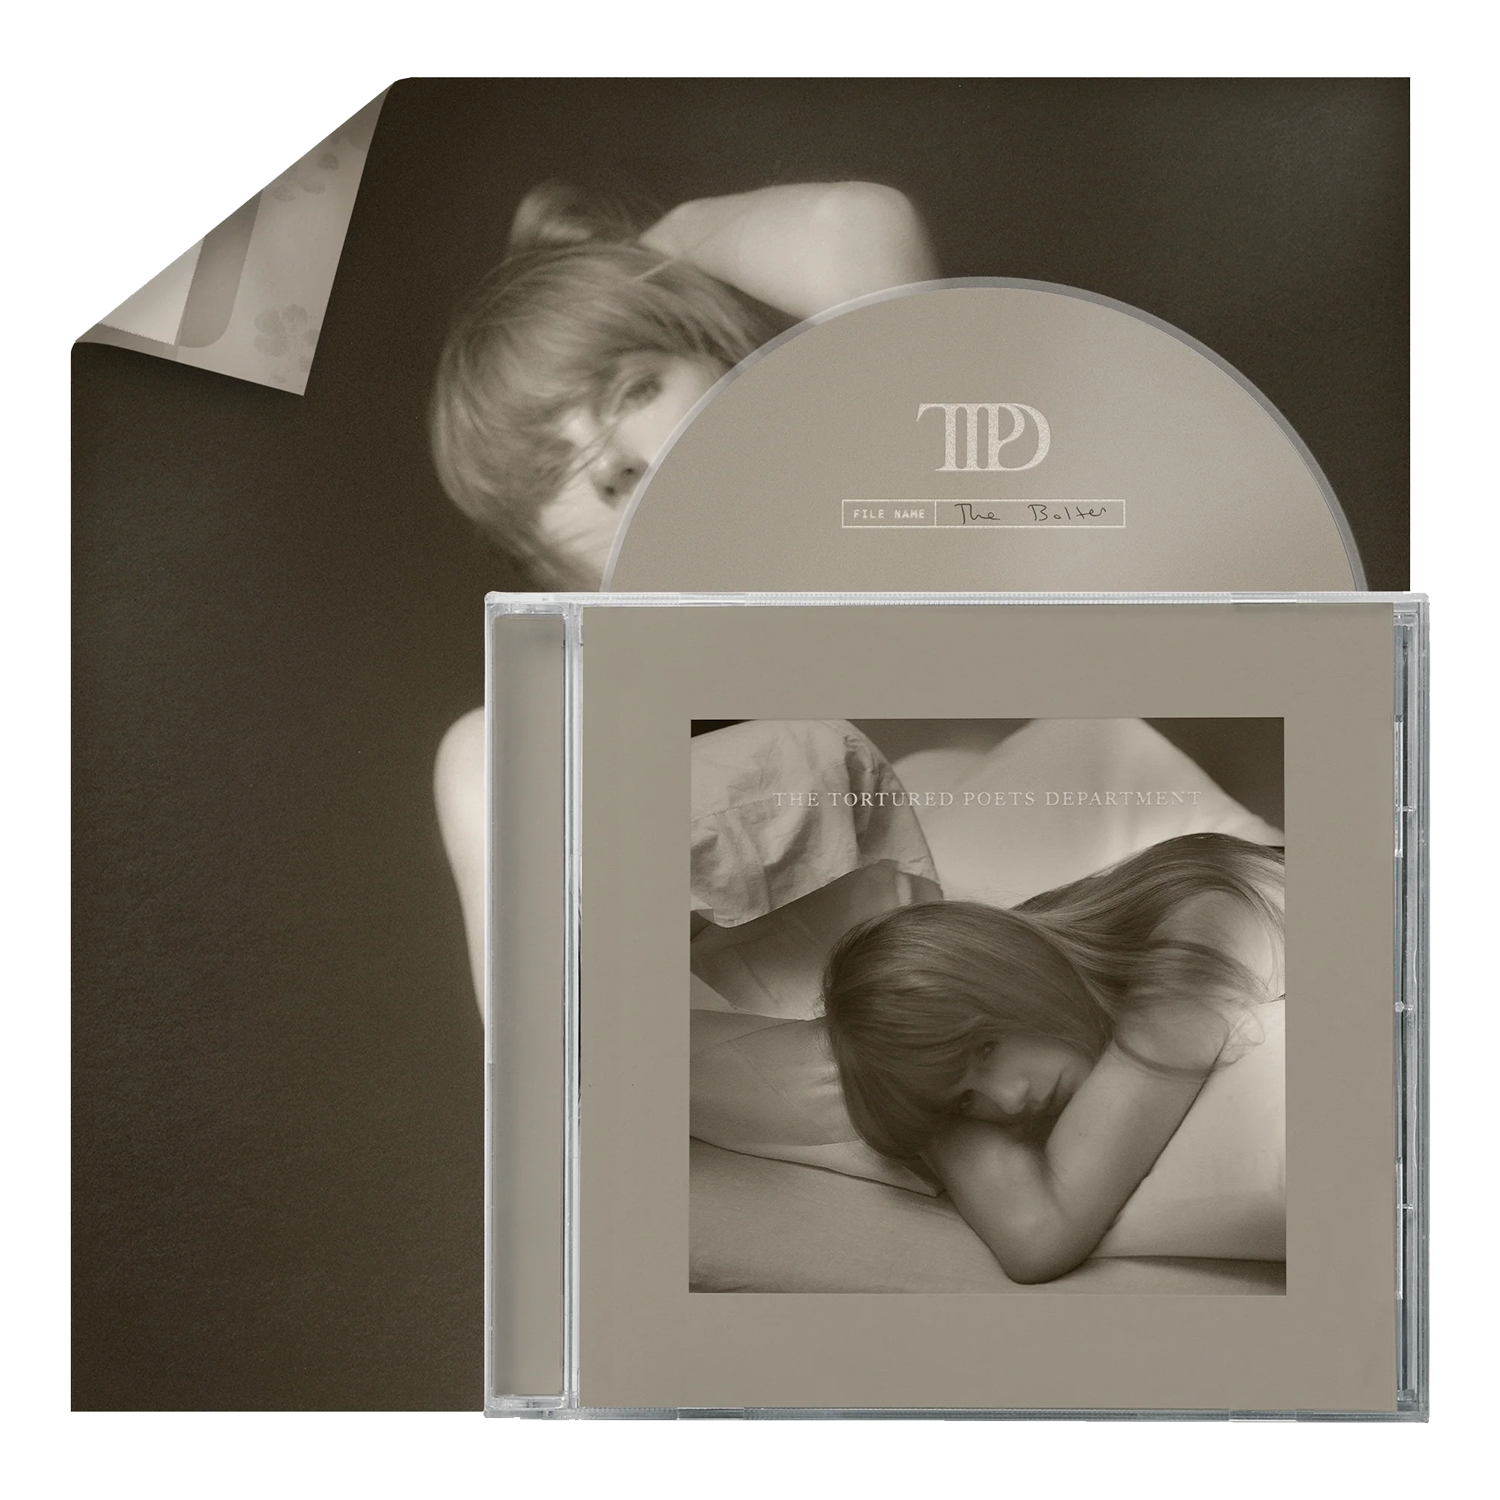 Taylor Swift - The Tortured Poets Department CD + Bonus Track “The Bolter”